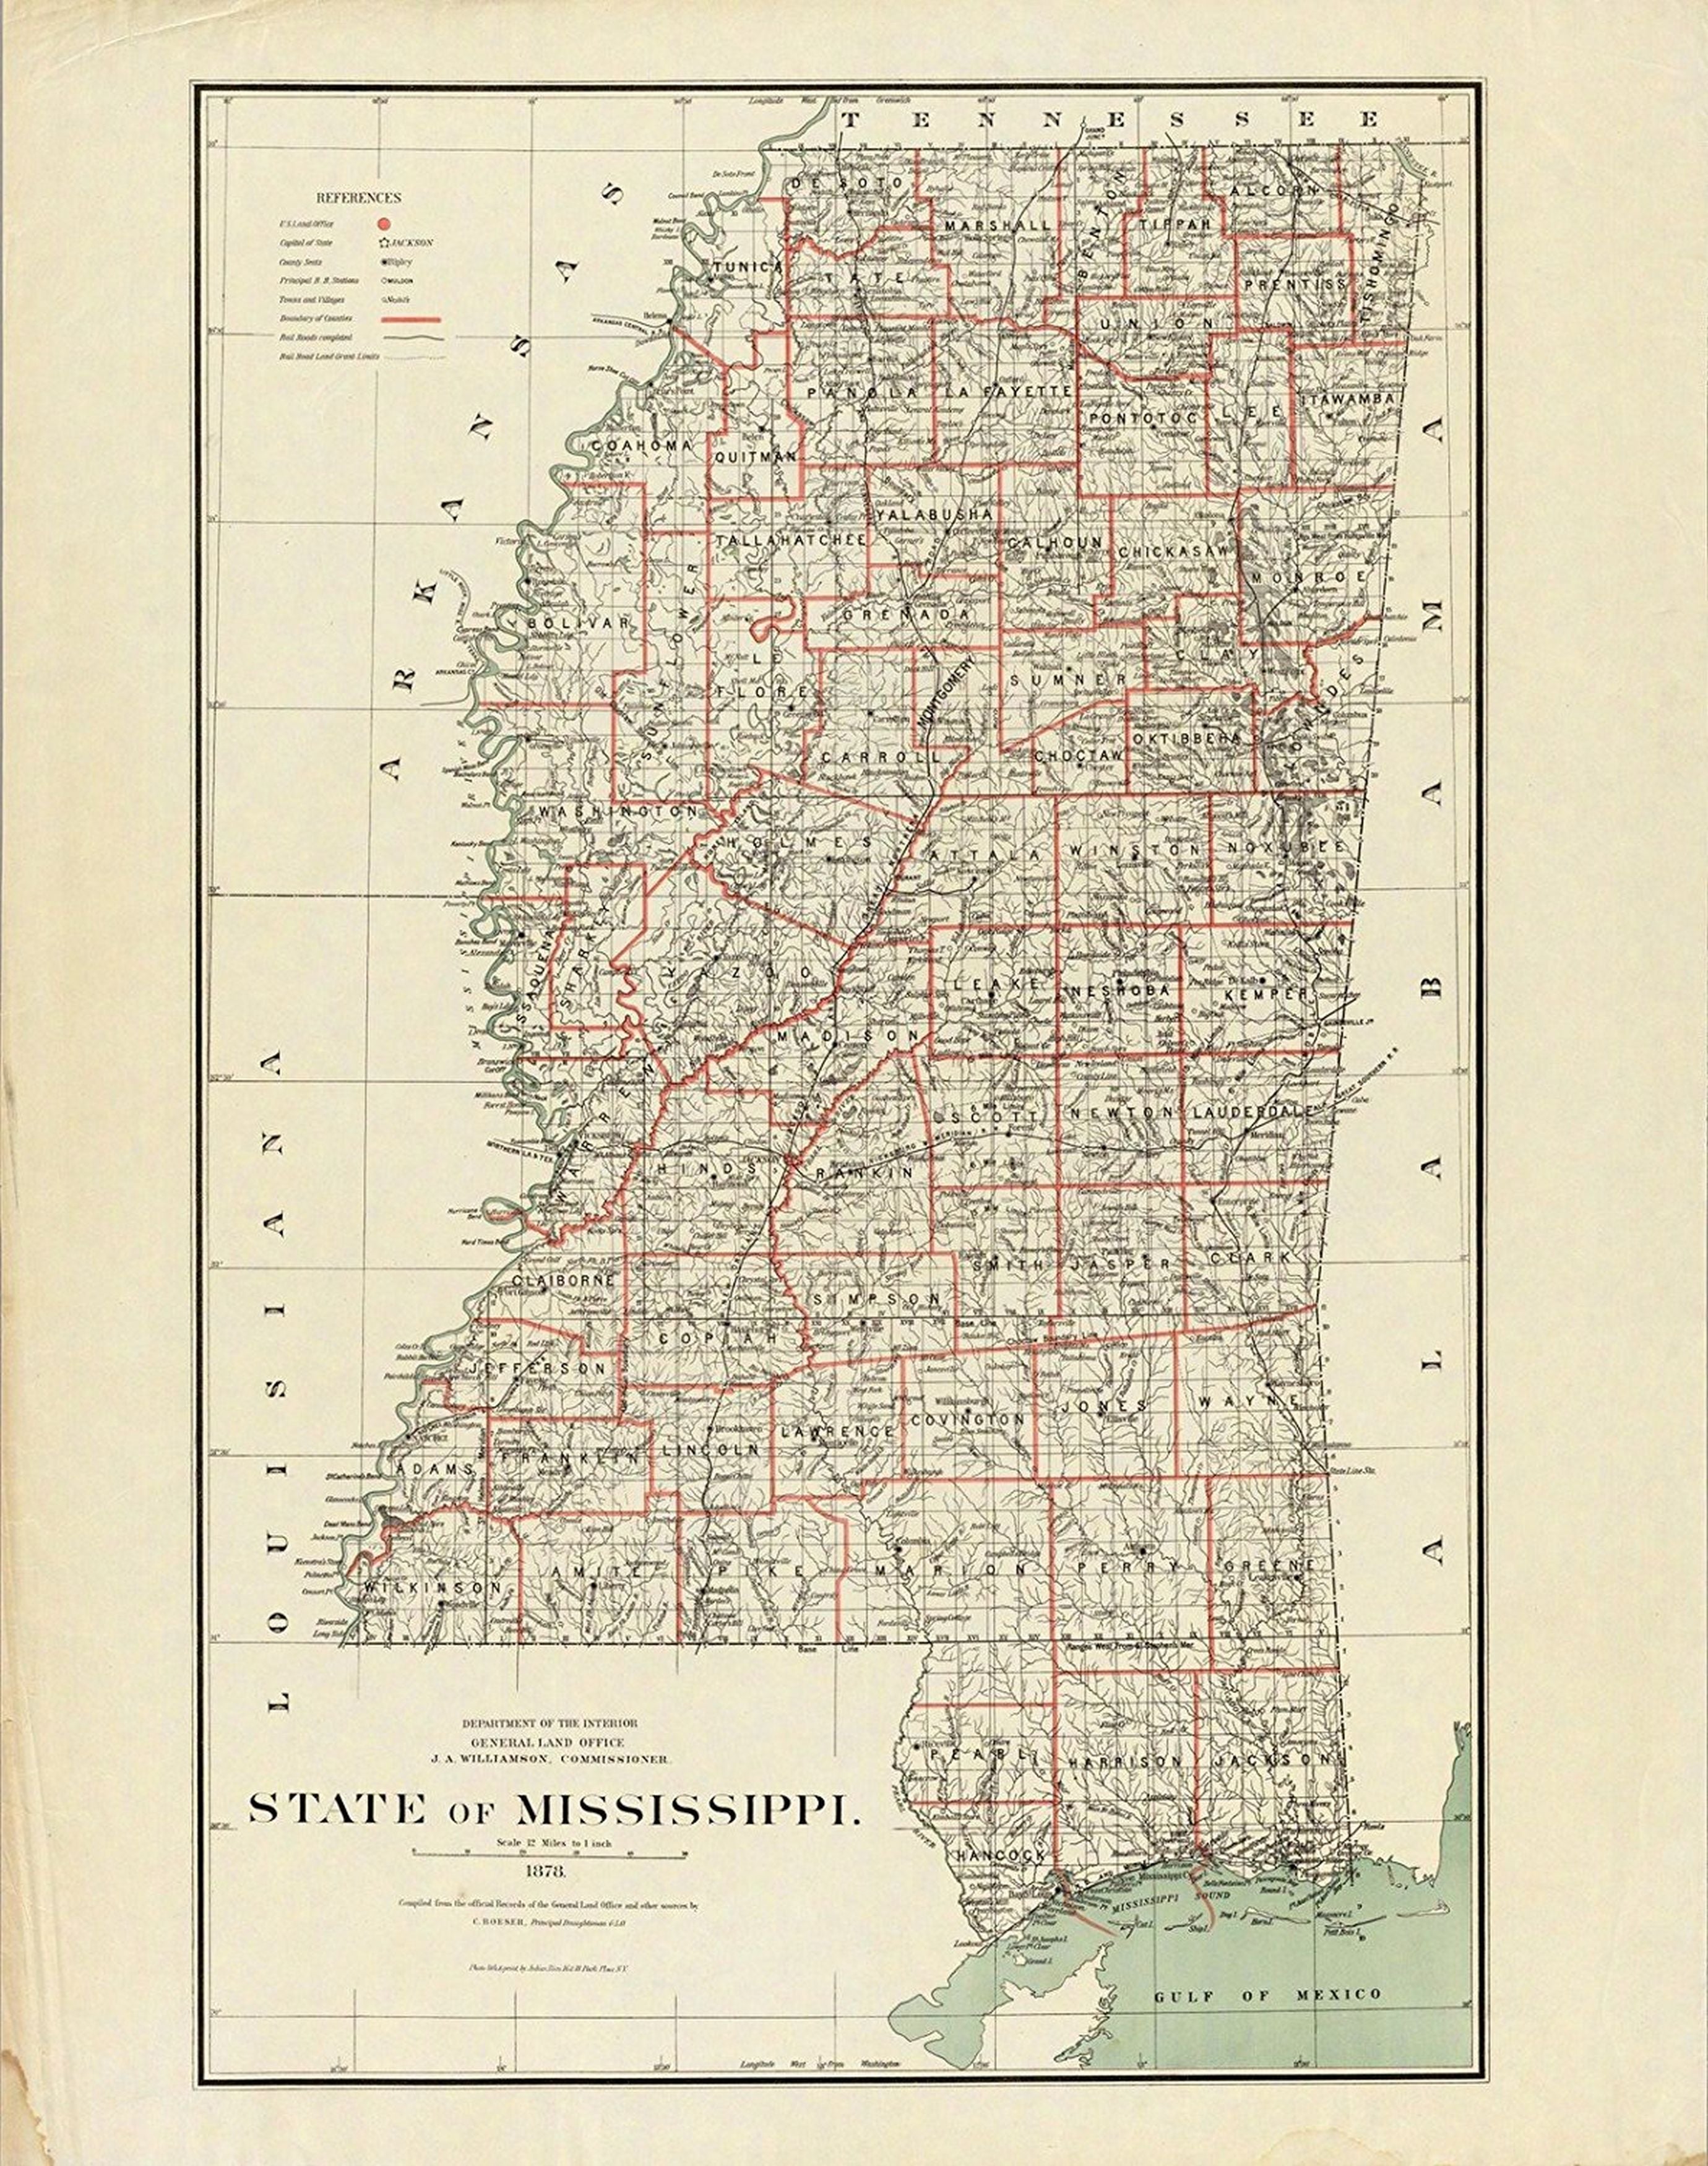 Department Of The Interior General Land Office J.A. Williamson, Commissioner. State of Mississippi. 1878. Compiled from the official Records of the General Land Office and other sources by C. Roeser, Principal Draughtsman G.L.O. Photo lith and print by J